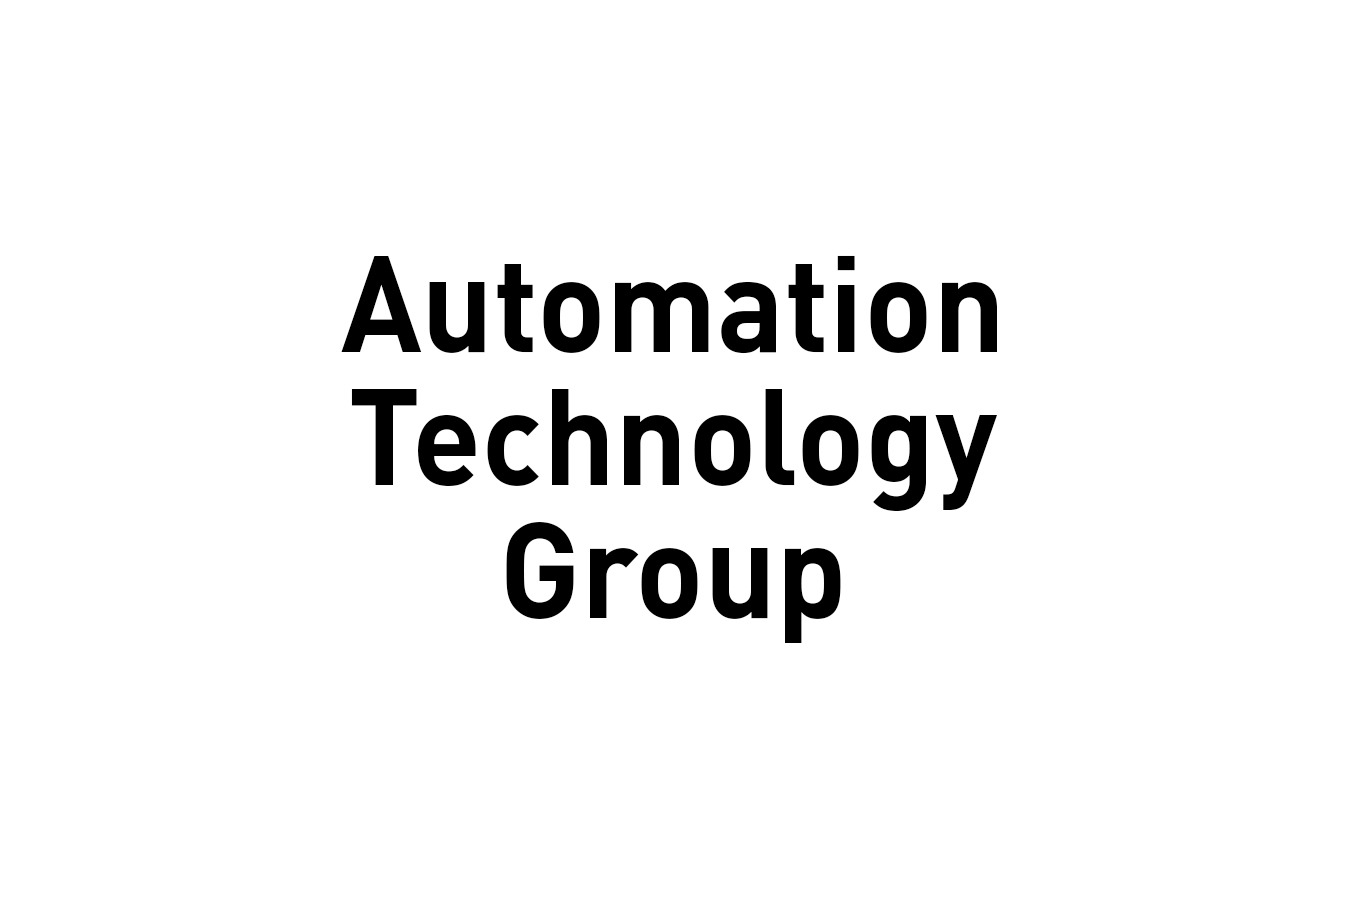 Automation Technology Group: Authorized Distributor